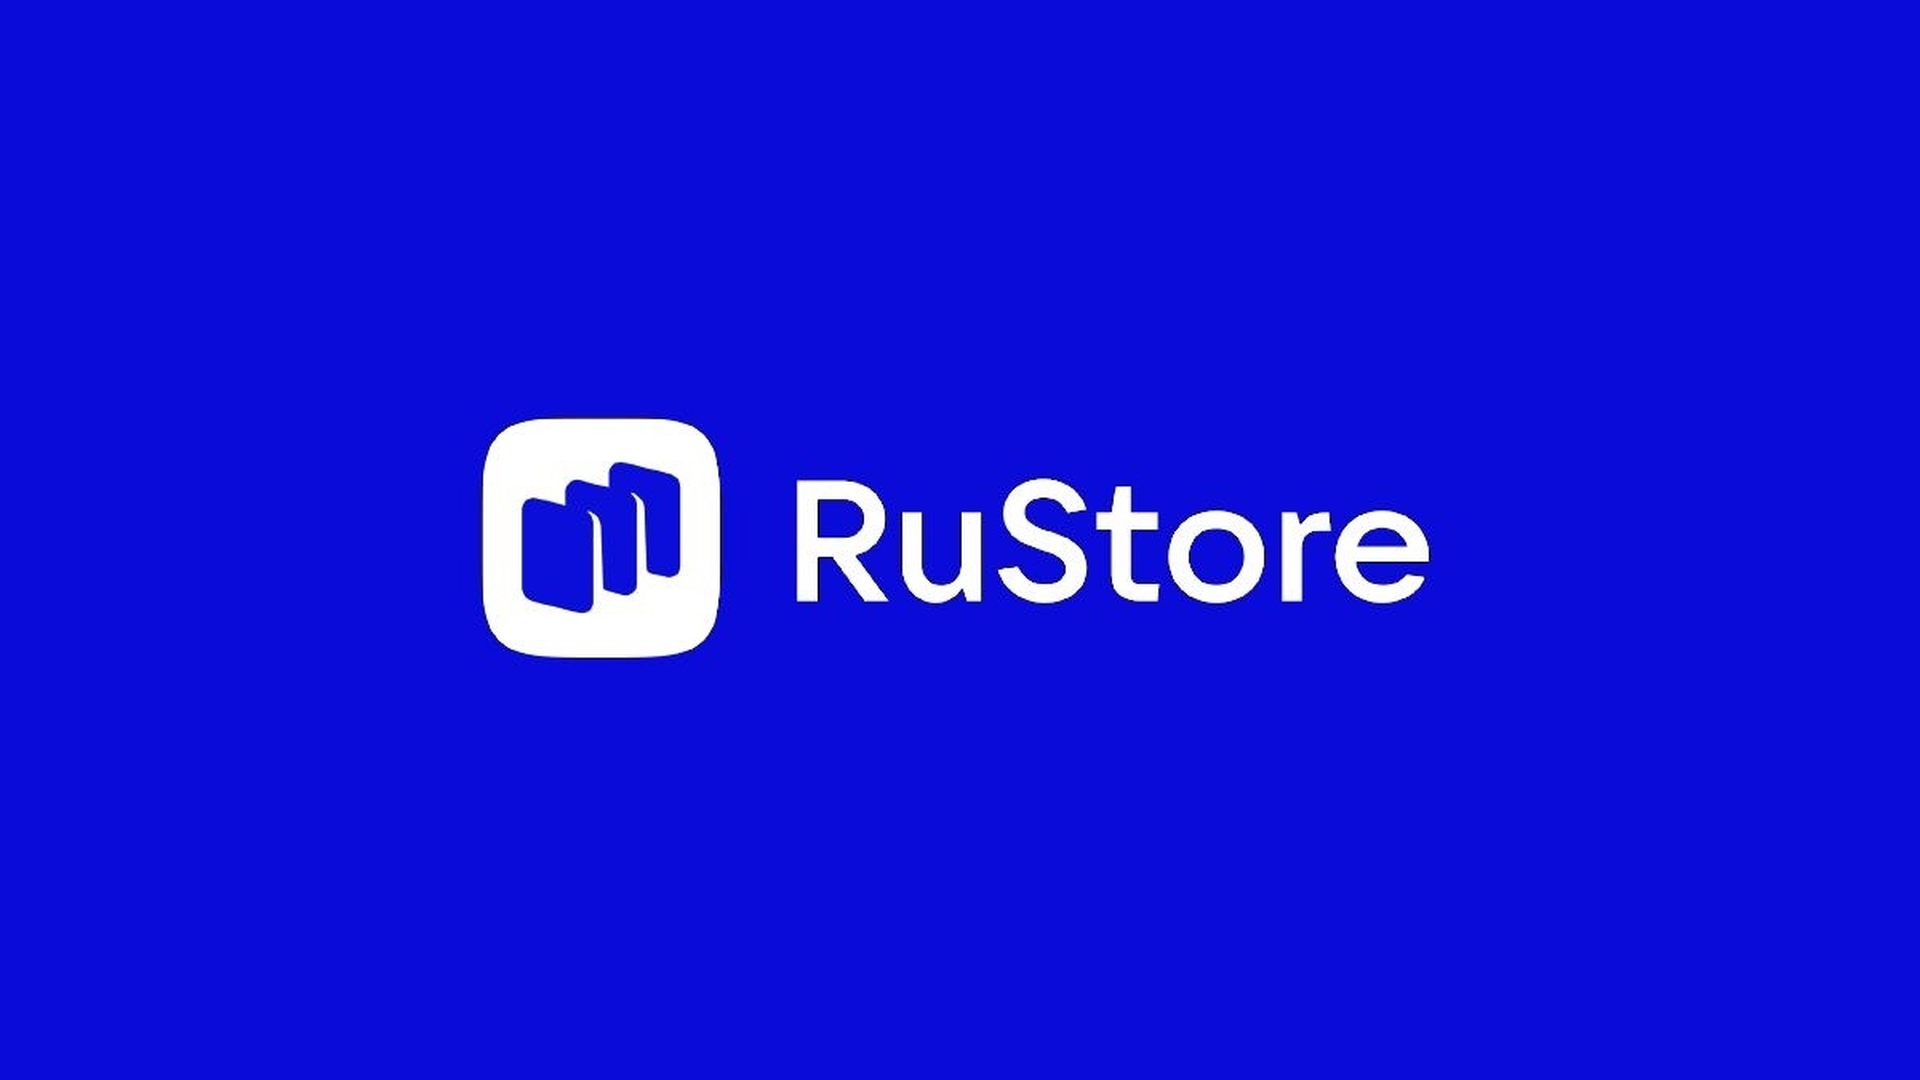 In this article, we are going to cover what is RuStore, an app store developed by VK to replace western alternatives such as Google Play Store and App Store.